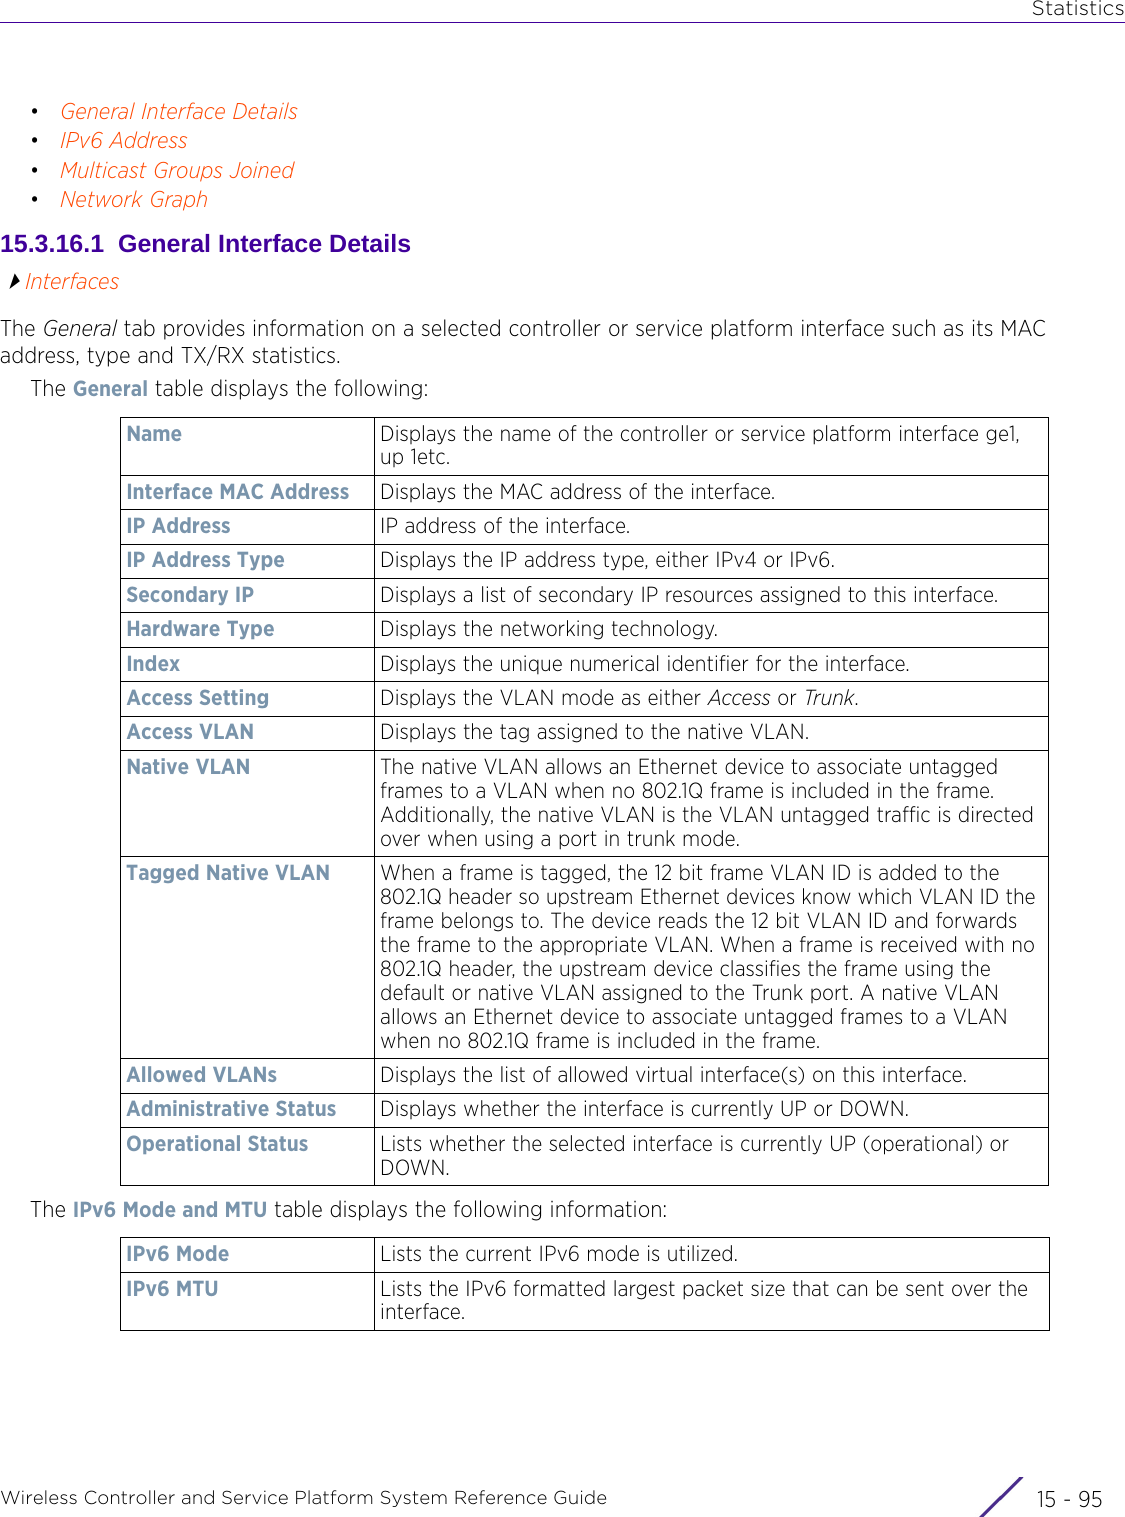 StatisticsWireless Controller and Service Platform System Reference Guide 15 - 95•General Interface Details•IPv6 Address•Multicast Groups Joined•Network Graph15.3.16.1  General Interface DetailsInterfacesThe General tab provides information on a selected controller or service platform interface such as its MAC address, type and TX/RX statistics.The General table displays the following:The IPv6 Mode and MTU table displays the following information:Name Displays the name of the controller or service platform interface ge1, up 1etc.Interface MAC Address Displays the MAC address of the interface.IP Address IP address of the interface. IP Address Type Displays the IP address type, either IPv4 or IPv6.Secondary IP Displays a list of secondary IP resources assigned to this interface.Hardware Type Displays the networking technology.Index Displays the unique numerical identifier for the interface.Access Setting Displays the VLAN mode as either Access or Trunk.Access VLAN Displays the tag assigned to the native VLAN.Native VLAN The native VLAN allows an Ethernet device to associate untagged frames to a VLAN when no 802.1Q frame is included in the frame. Additionally, the native VLAN is the VLAN untagged traffic is directed over when using a port in trunk mode.Tagged Native VLAN  When a frame is tagged, the 12 bit frame VLAN ID is added to the 802.1Q header so upstream Ethernet devices know which VLAN ID the frame belongs to. The device reads the 12 bit VLAN ID and forwards the frame to the appropriate VLAN. When a frame is received with no 802.1Q header, the upstream device classifies the frame using the default or native VLAN assigned to the Trunk port. A native VLAN allows an Ethernet device to associate untagged frames to a VLAN when no 802.1Q frame is included in the frame.Allowed VLANs Displays the list of allowed virtual interface(s) on this interface.Administrative Status Displays whether the interface is currently UP or DOWN. Operational Status Lists whether the selected interface is currently UP (operational) or DOWN.IPv6 Mode Lists the current IPv6 mode is utilized.IPv6 MTU Lists the IPv6 formatted largest packet size that can be sent over the interface.